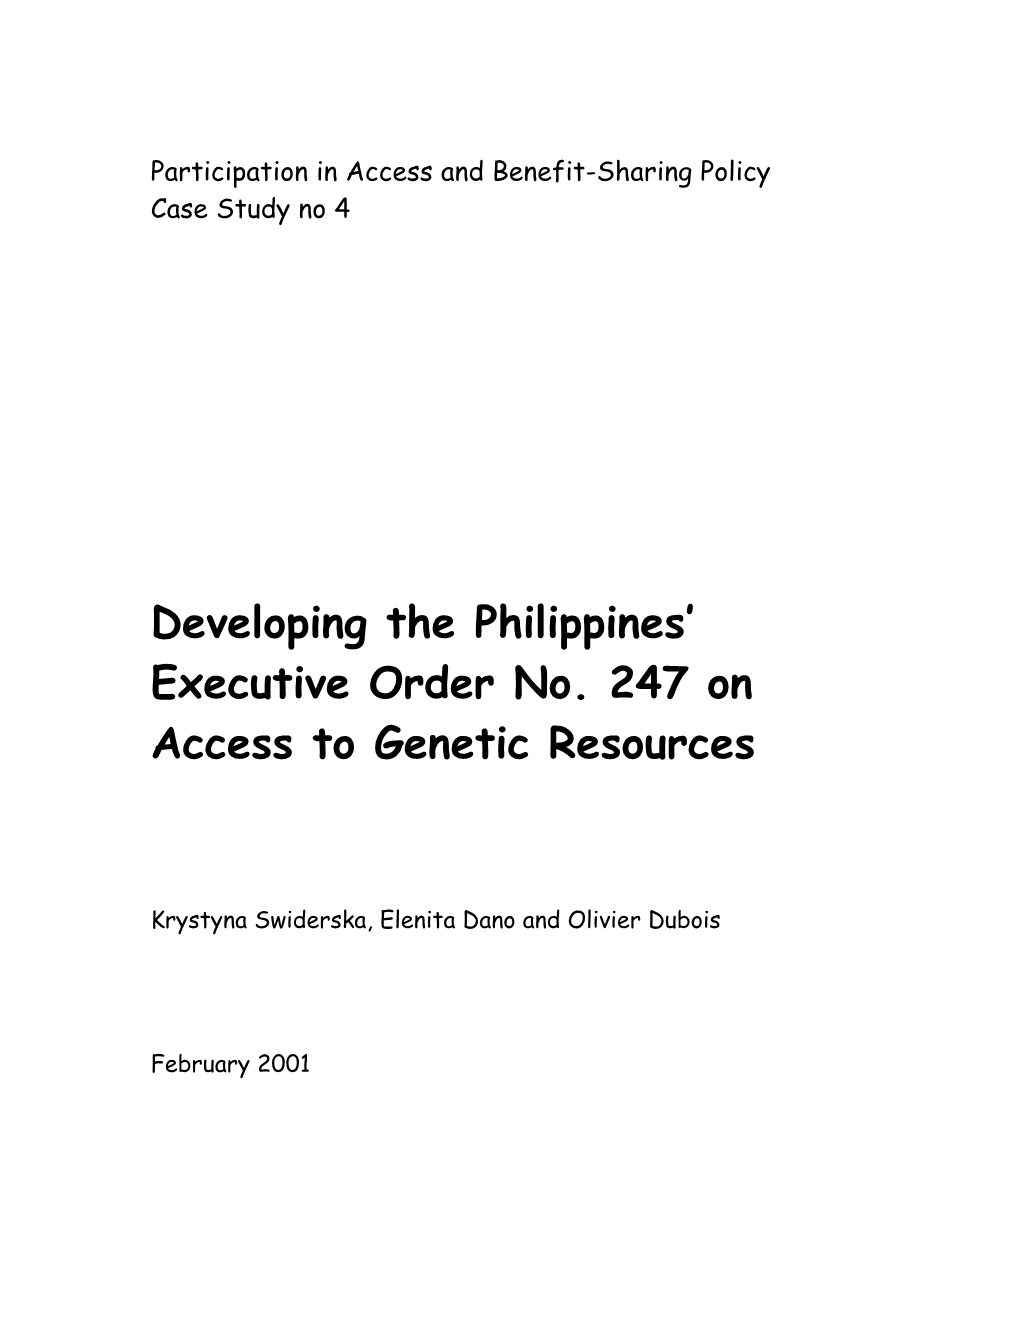 Developing the Philippines' Executive Order No. 247 on Access to Genetic Resources